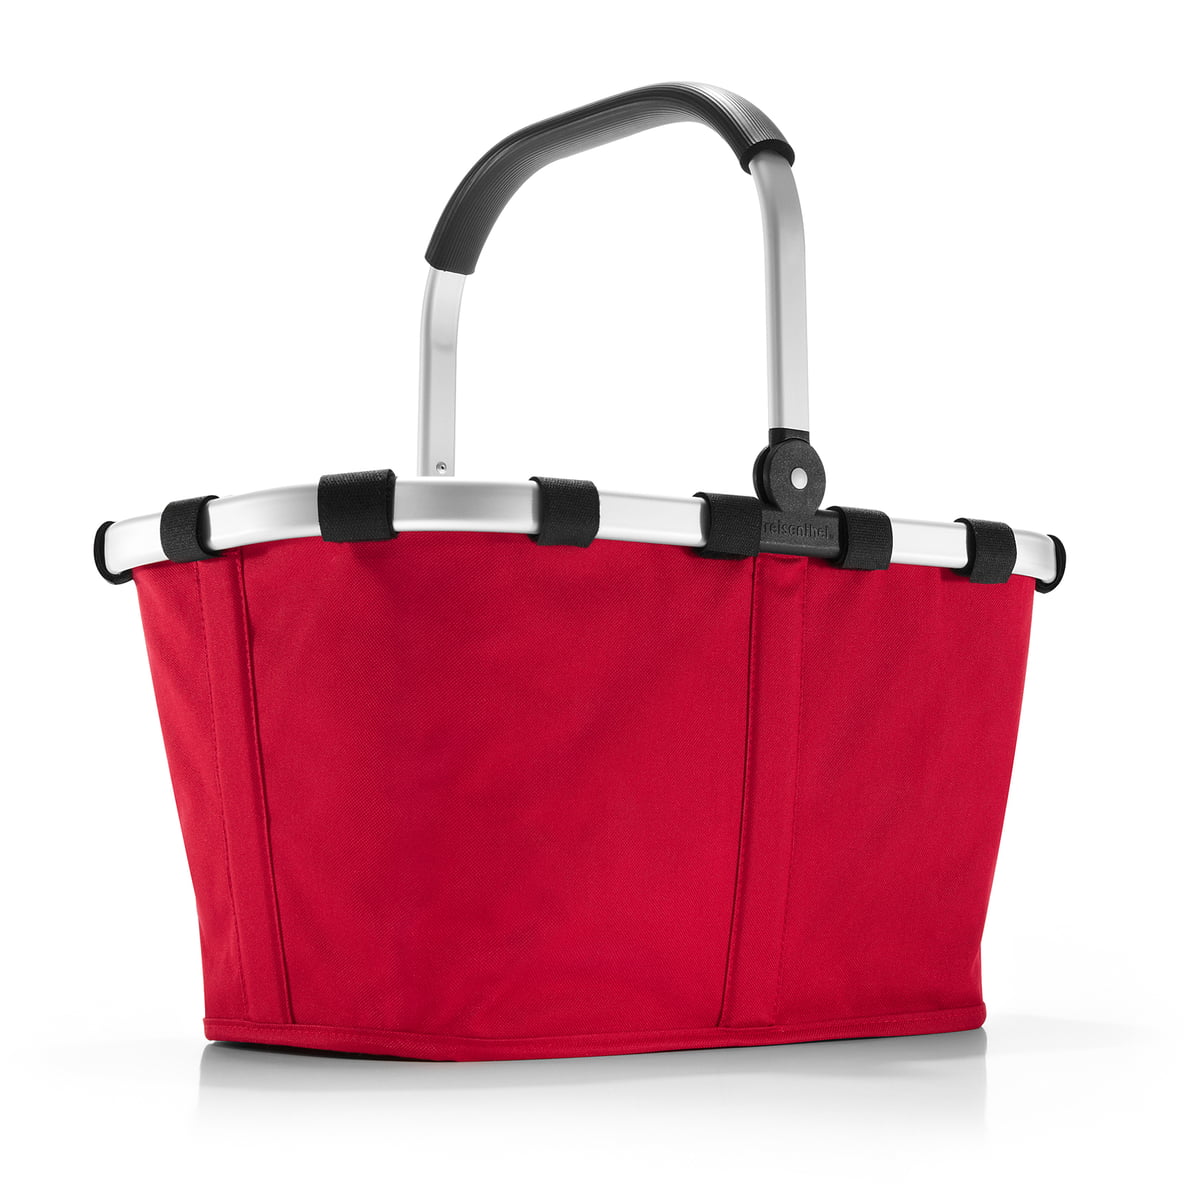 Glencheck Red Reisenthel carrybag glencheck red Gym Tote 48 Centimeters 22 Multicolour 